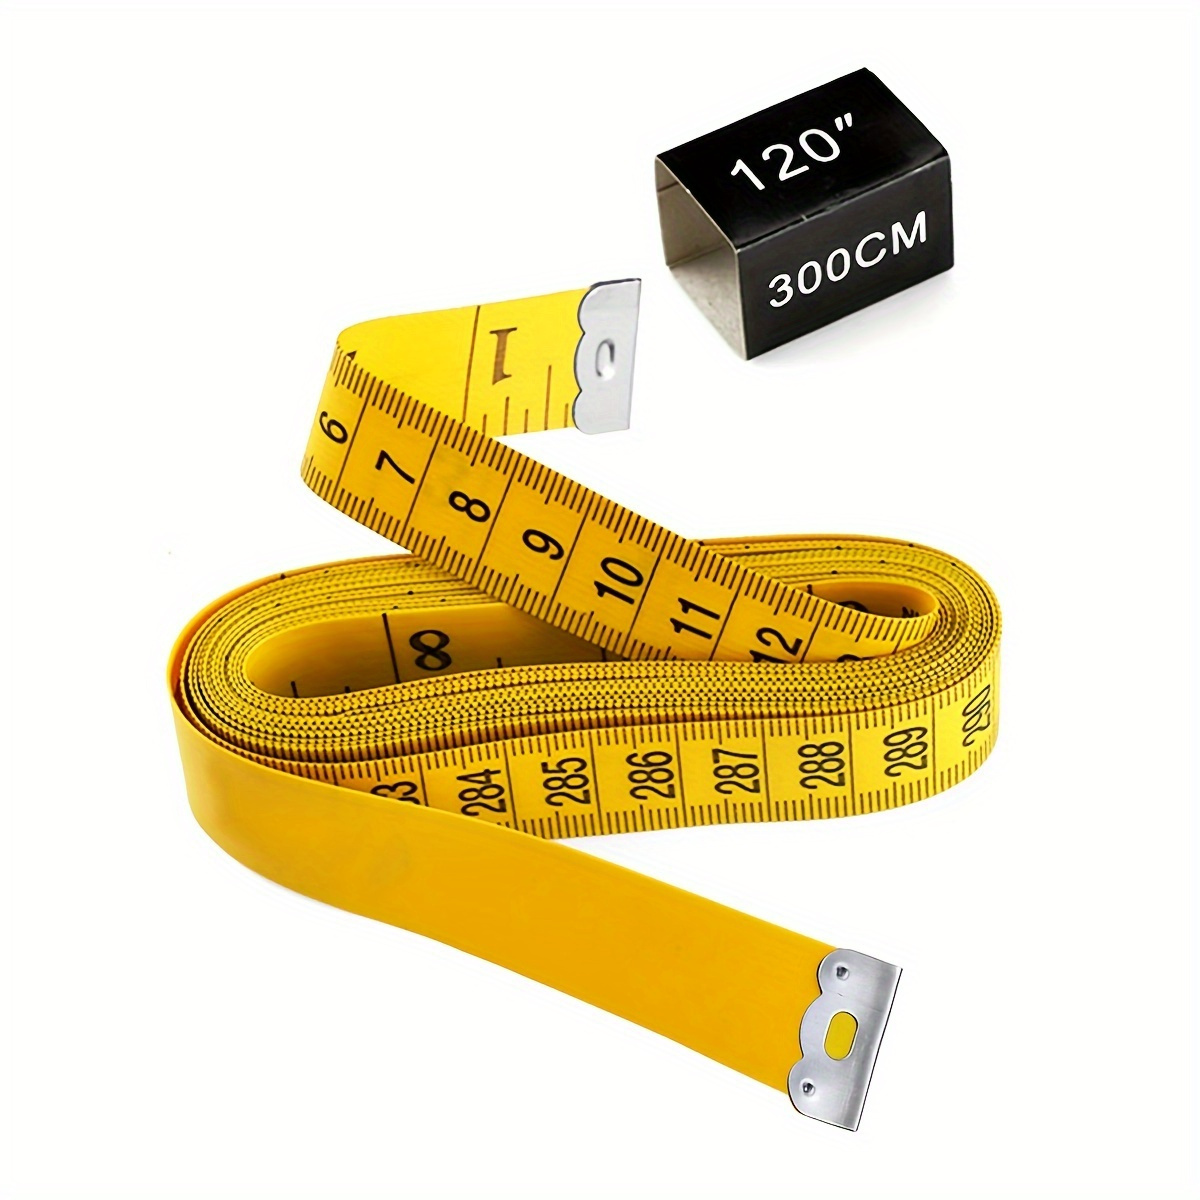 5pcs Dual Sided Body Measuring Ruler Body Tape Measure 60inch